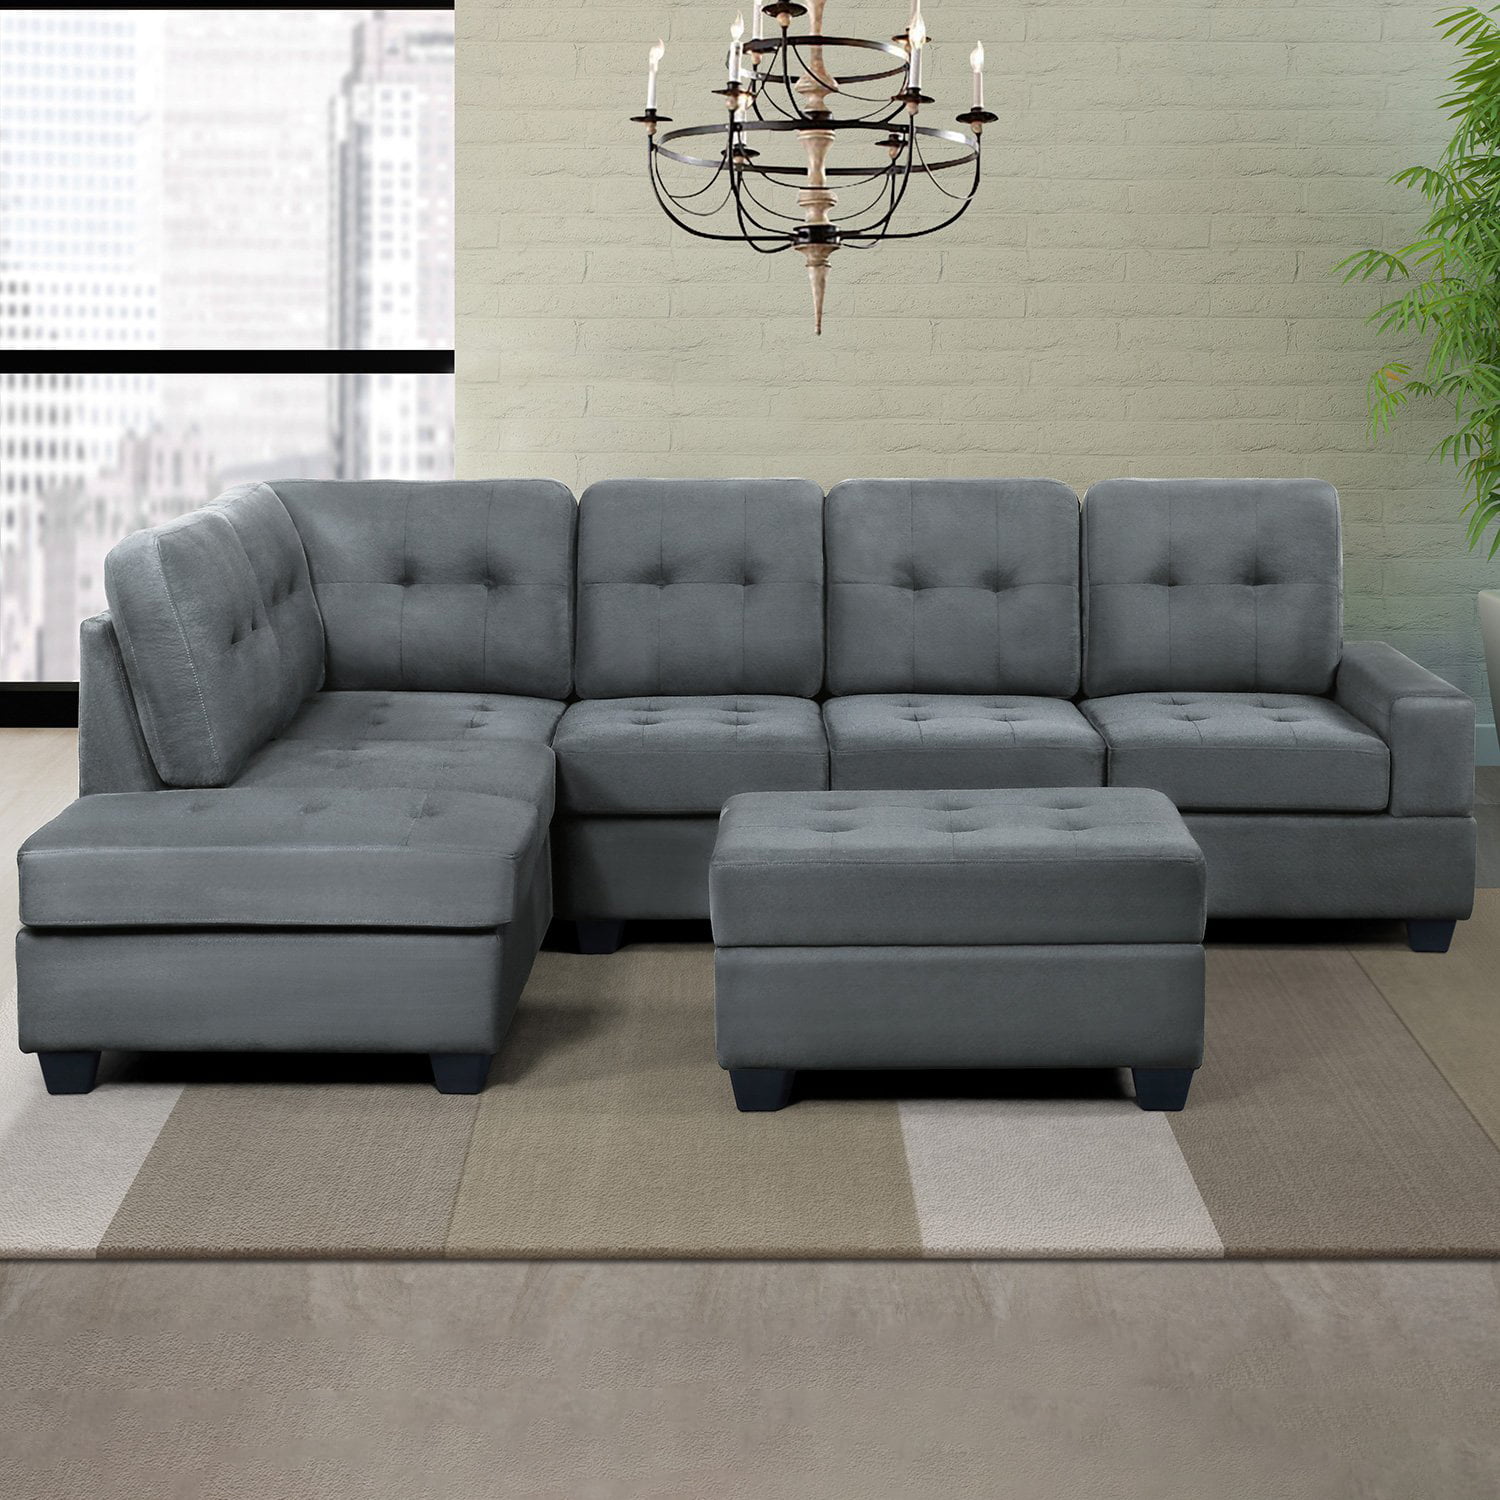 3 Piece Sectional Sofa Microfiber With, Sectional Sofa With Chaise And Storage Ottoman